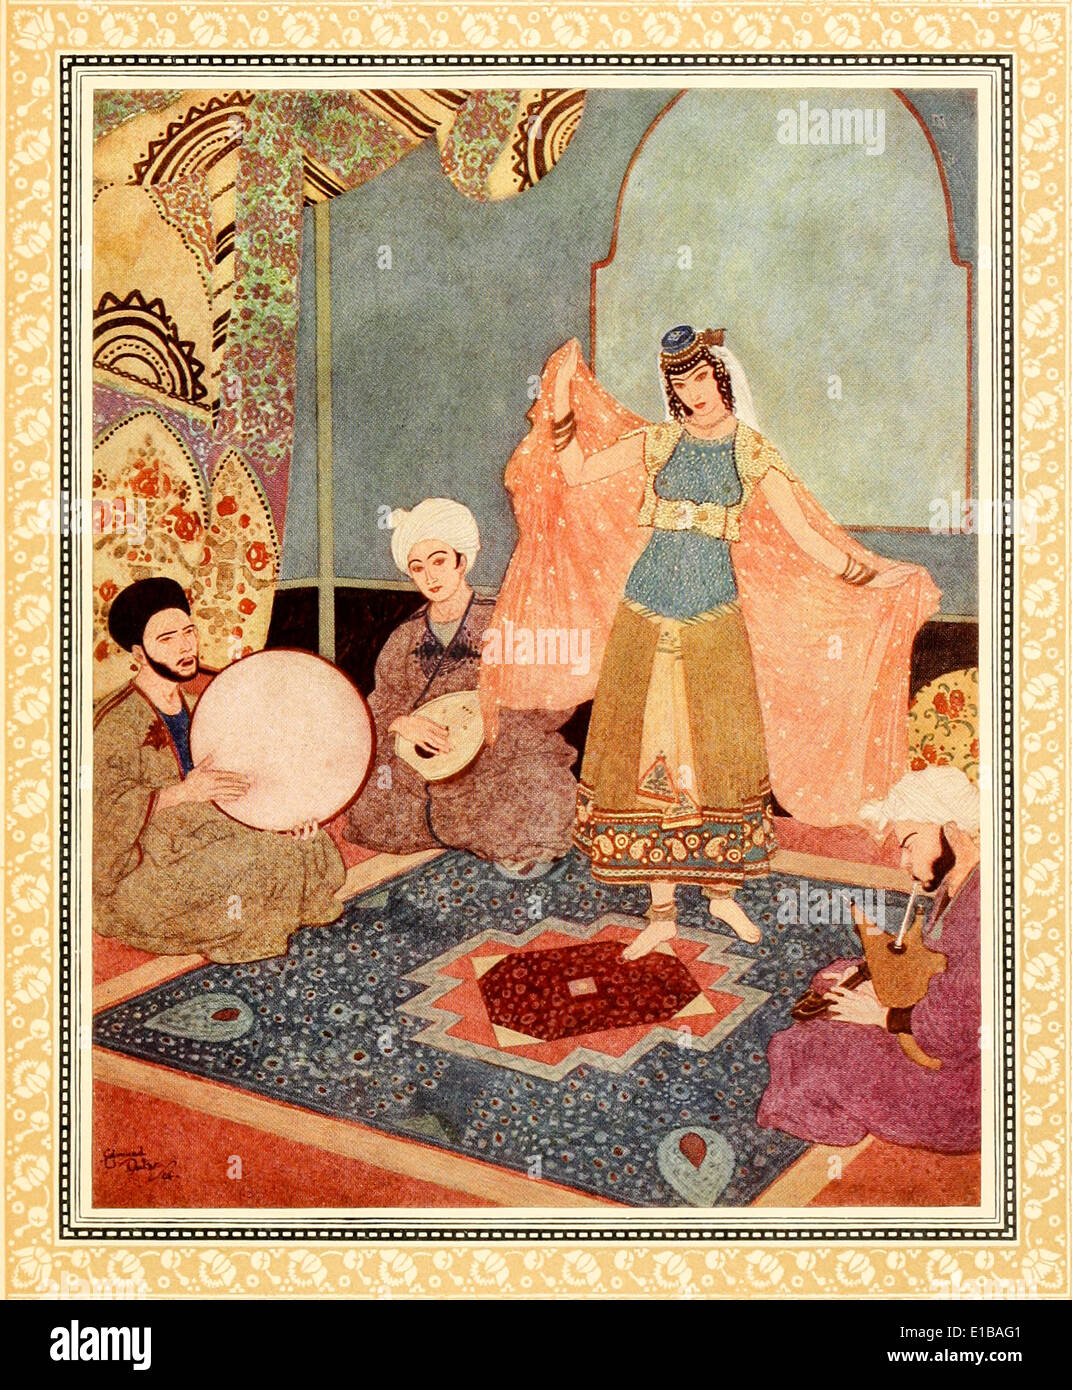 Edmund Dulac (1882-1953) illustration from ‘Sinbad the Sailor & Other Stories from the Arabian Nights’. The Sleeper Awakened. Stock Photo